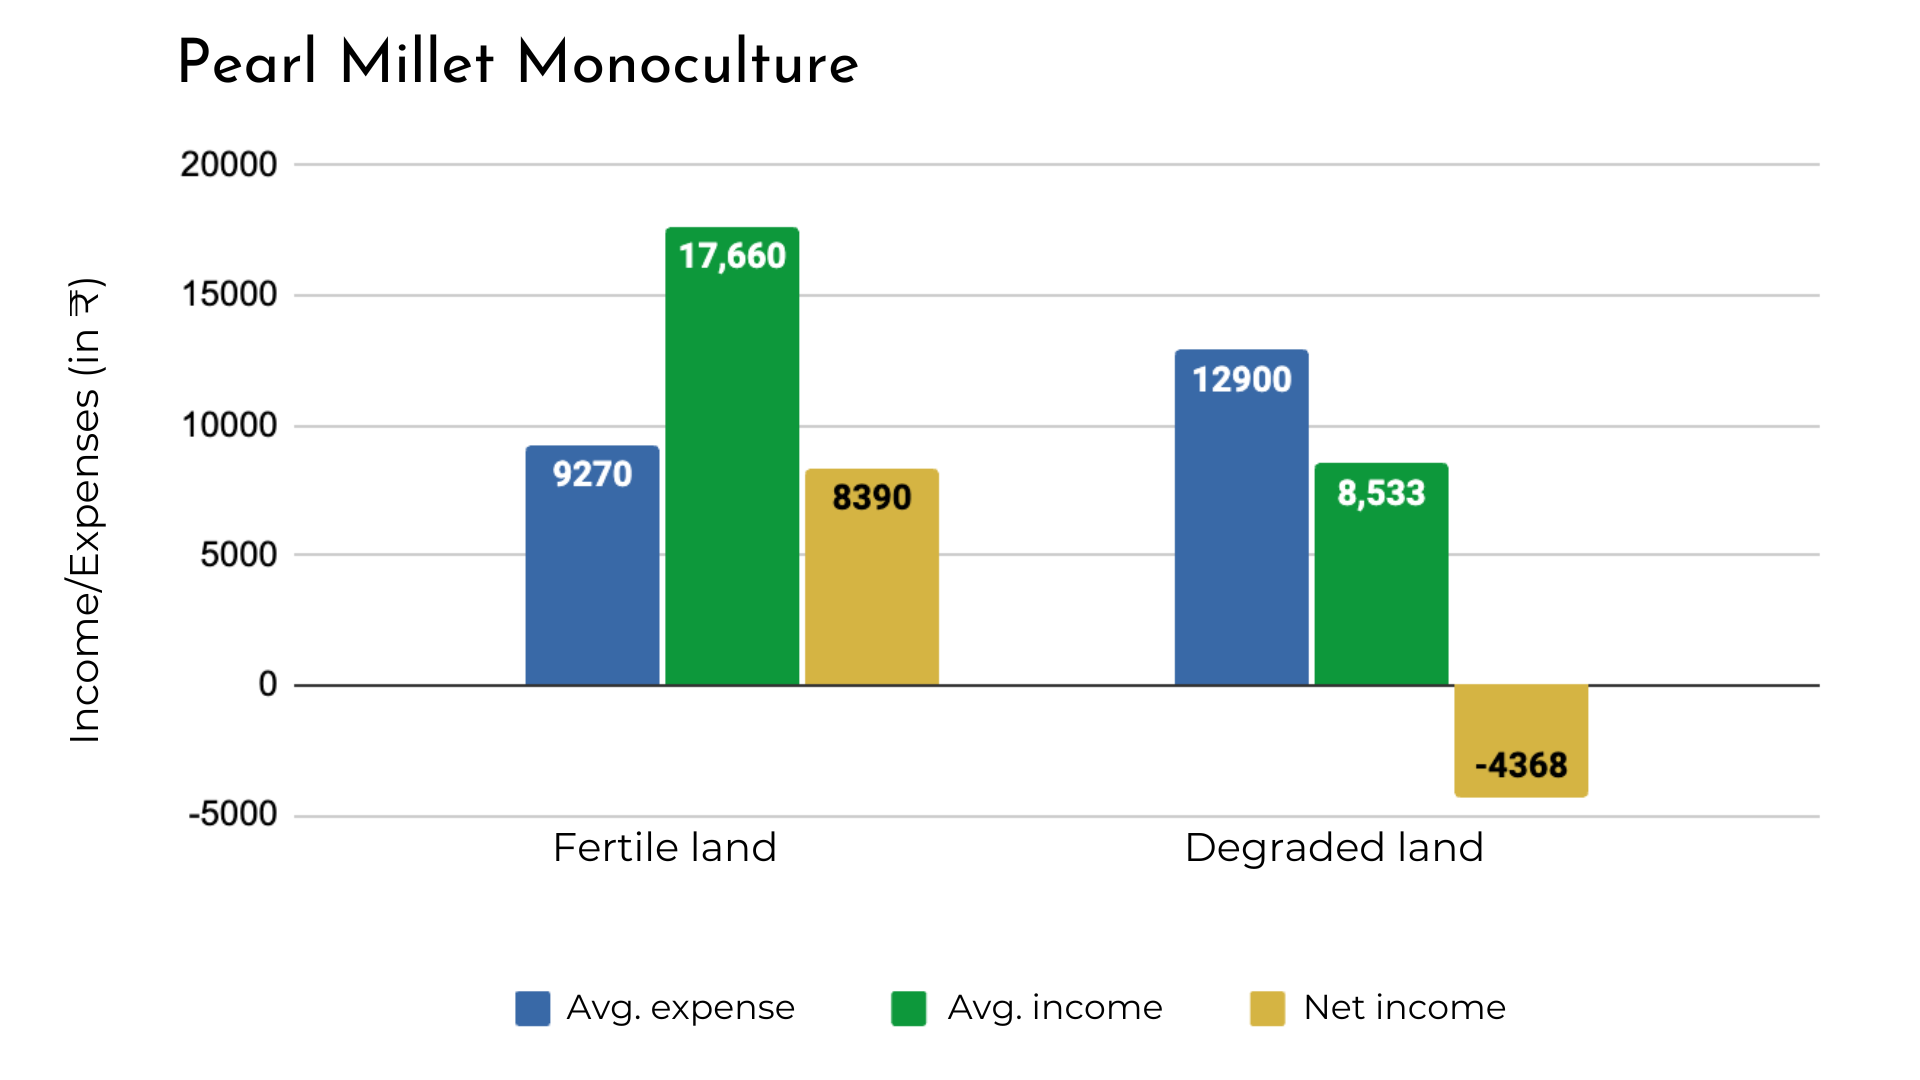 The difference in net income that can be earned from pearl millet cultivation in fertile and degraded land.